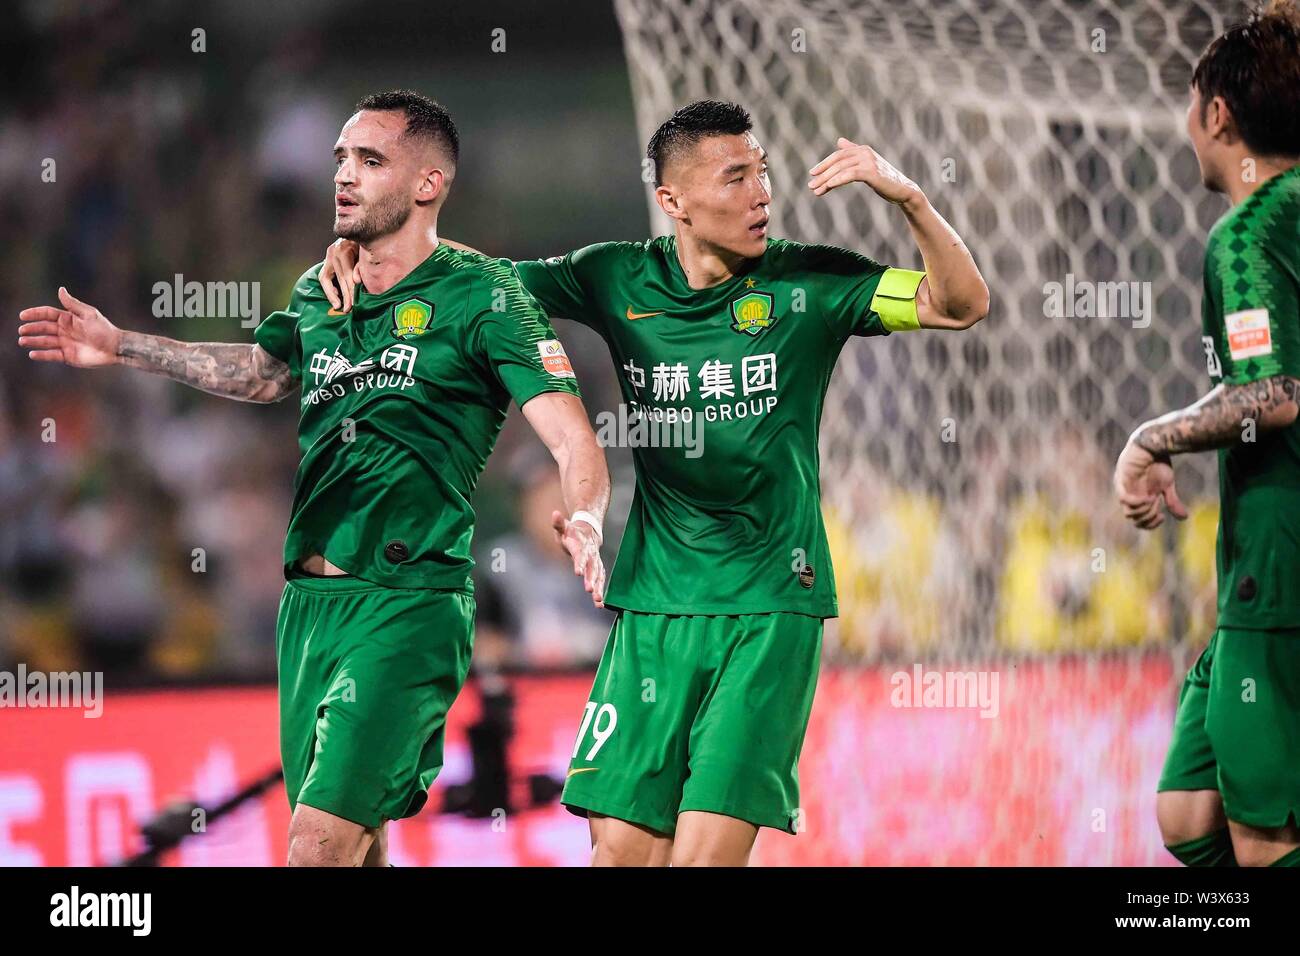 Brazilian football player Renato Soares de Oliveira Augusto, or simply Renato Augusto, left, of Beijing Sinobo Guoan celebrates with his teammates after scoring against Beijing Renhe in their 18th round match during the 2019 Chinese Football Association Super League (CSL) in Beijing, China, 17 July 2019. Beijing Sinobo Guoan defeated Beijing Renhe 2-1. Stock Photo